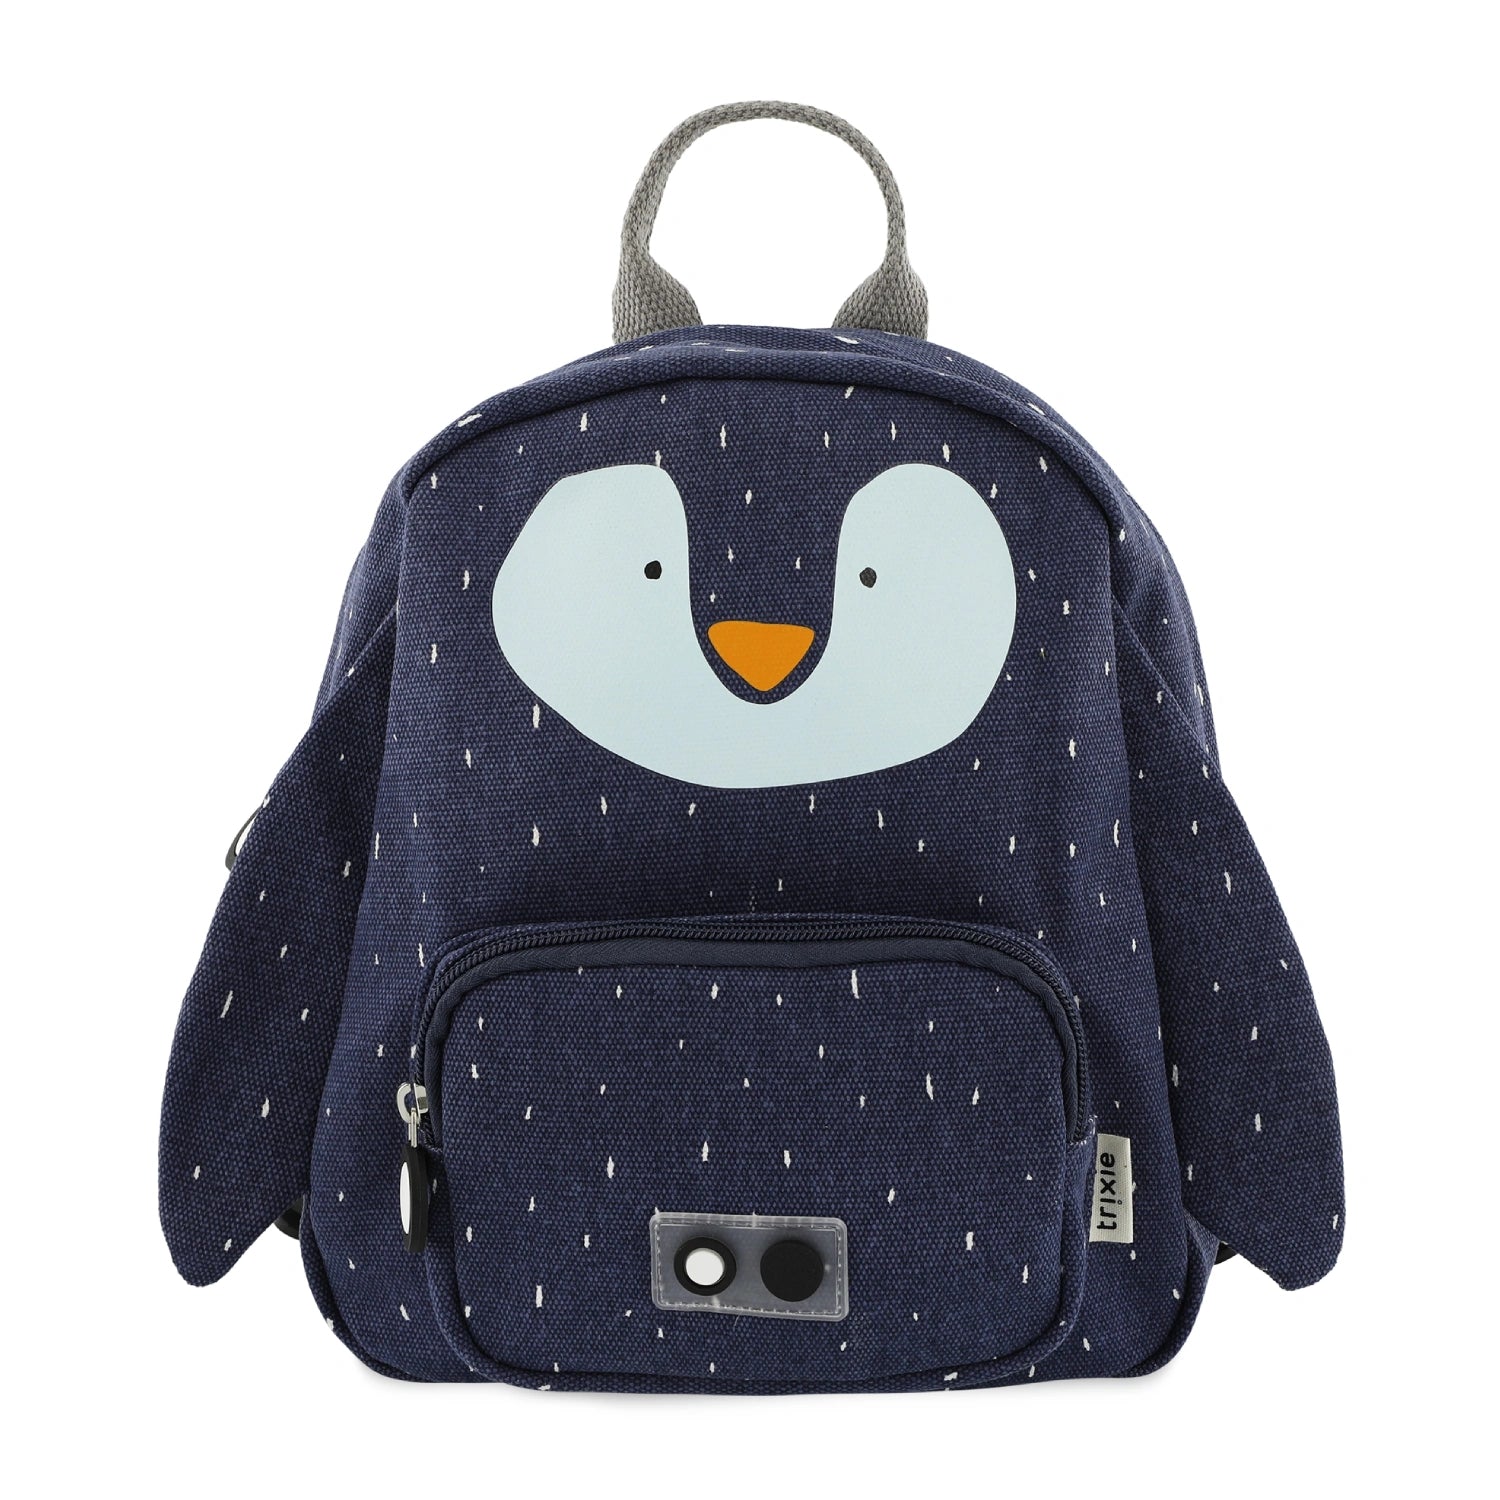 An image of Kids School Backpack - Trixie Bag Collection Mr. Penguin